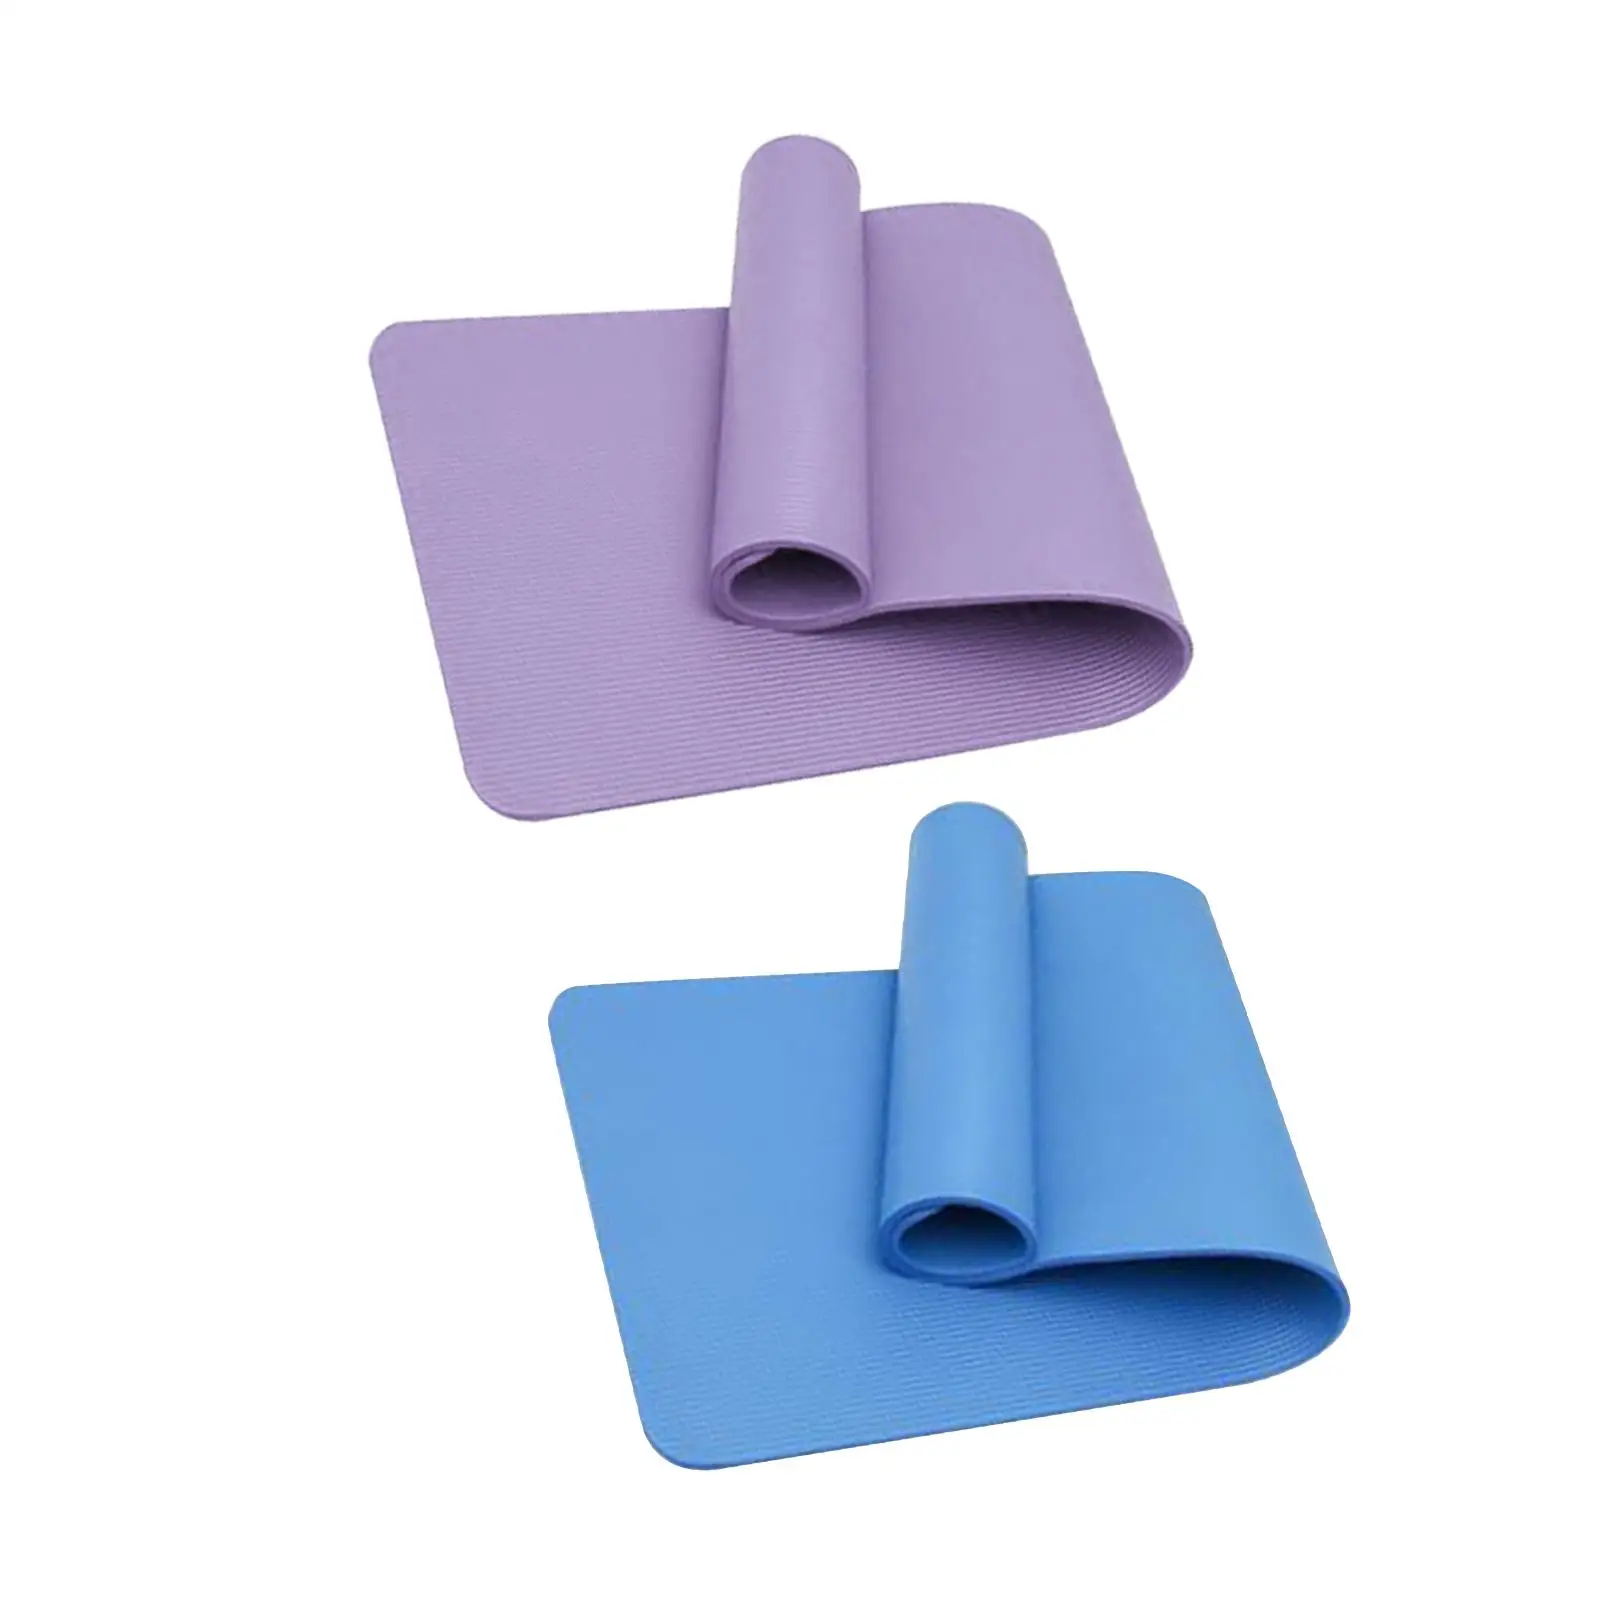 Yoga mats sports fitness mats cushion knee pads women for exercise floor